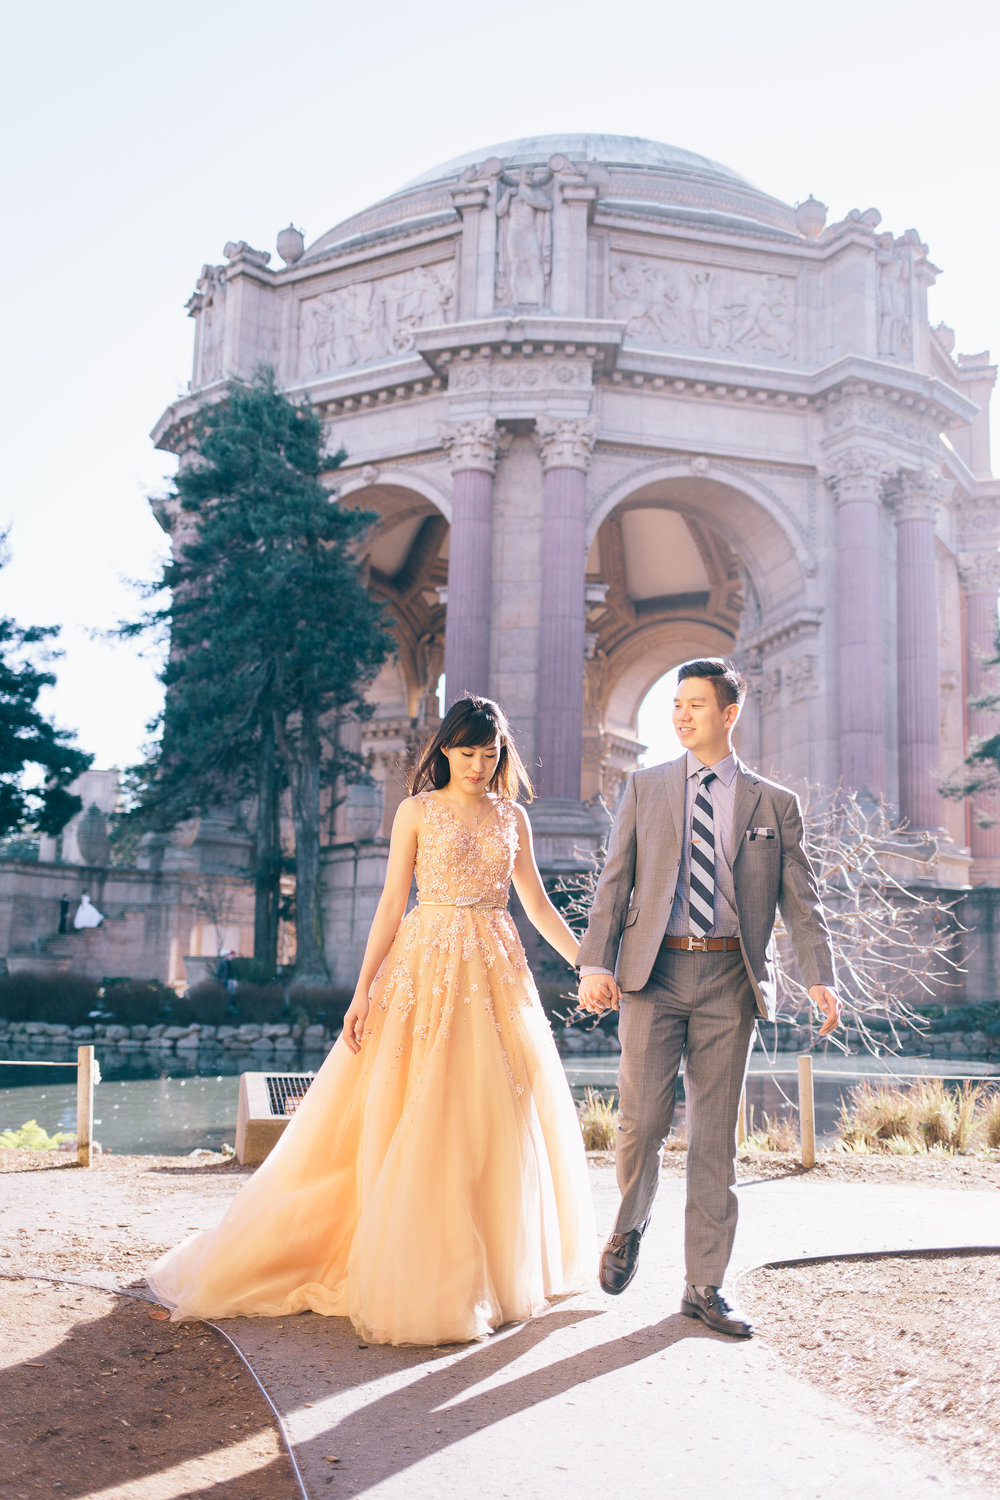 Best Engagement Photo Locations in San Francisco - Palace of Fine Arts Engagement Photos by JBJ Pictures (10).jpg